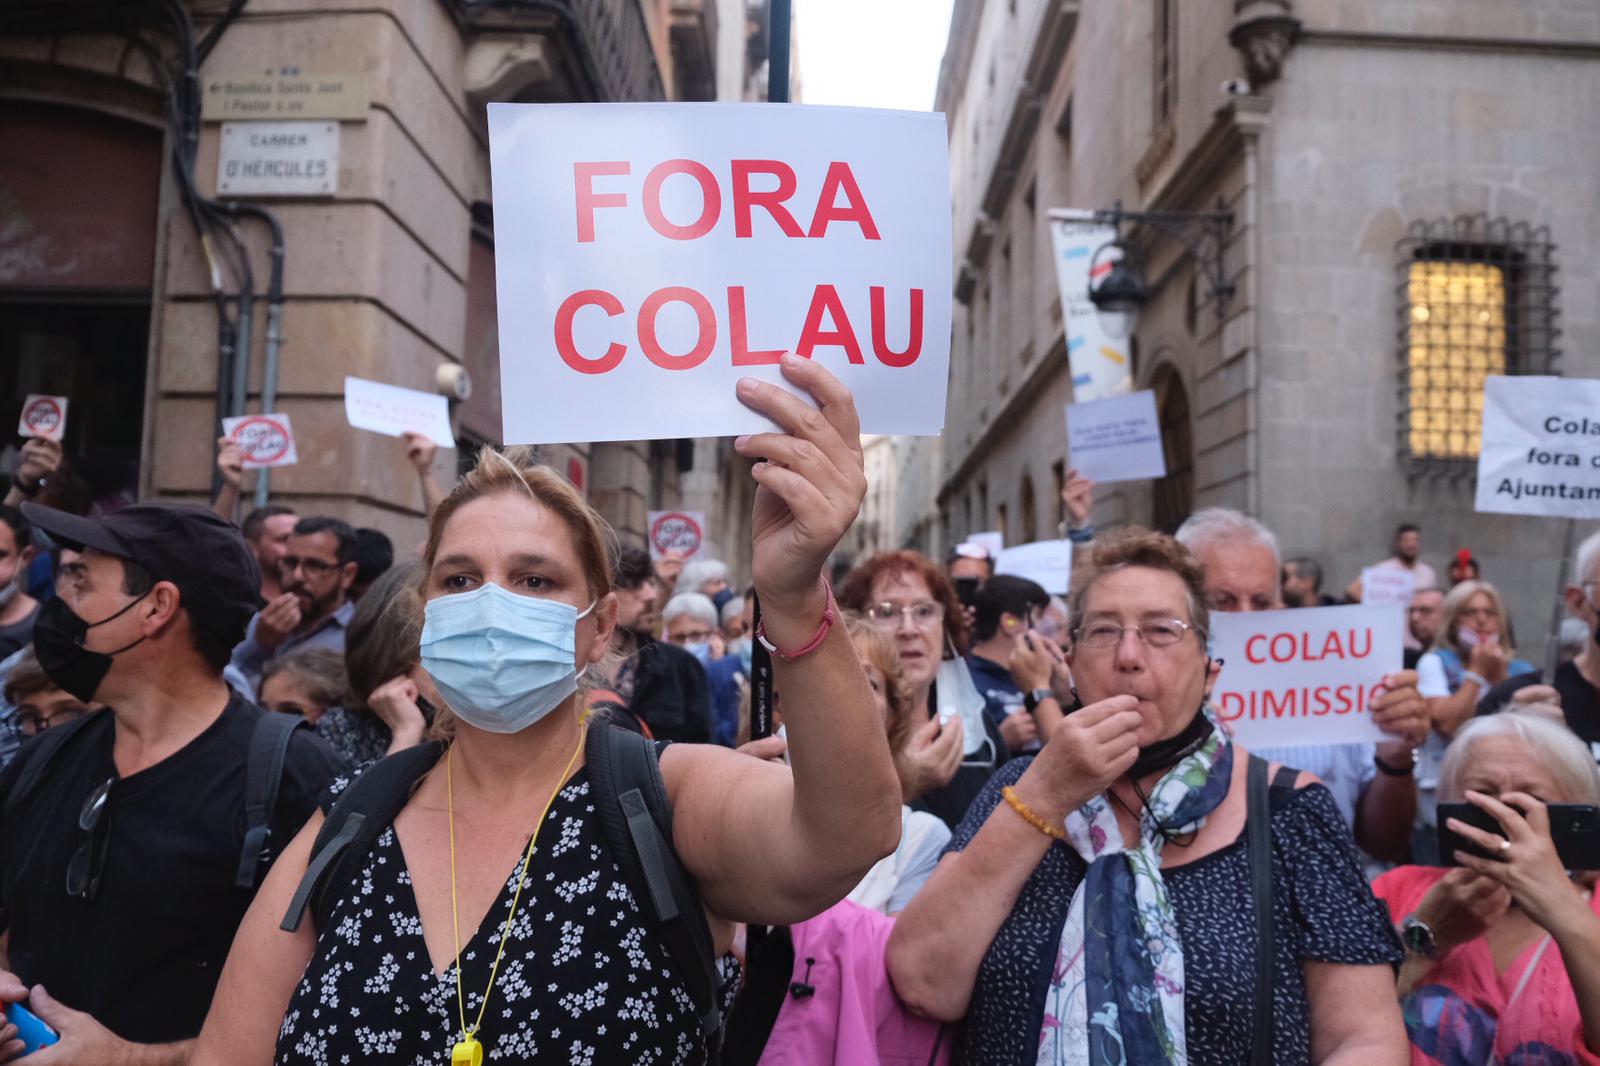 "Get out of our neighbourhoods, Colau", the chant that surprised Barcelona's mayor